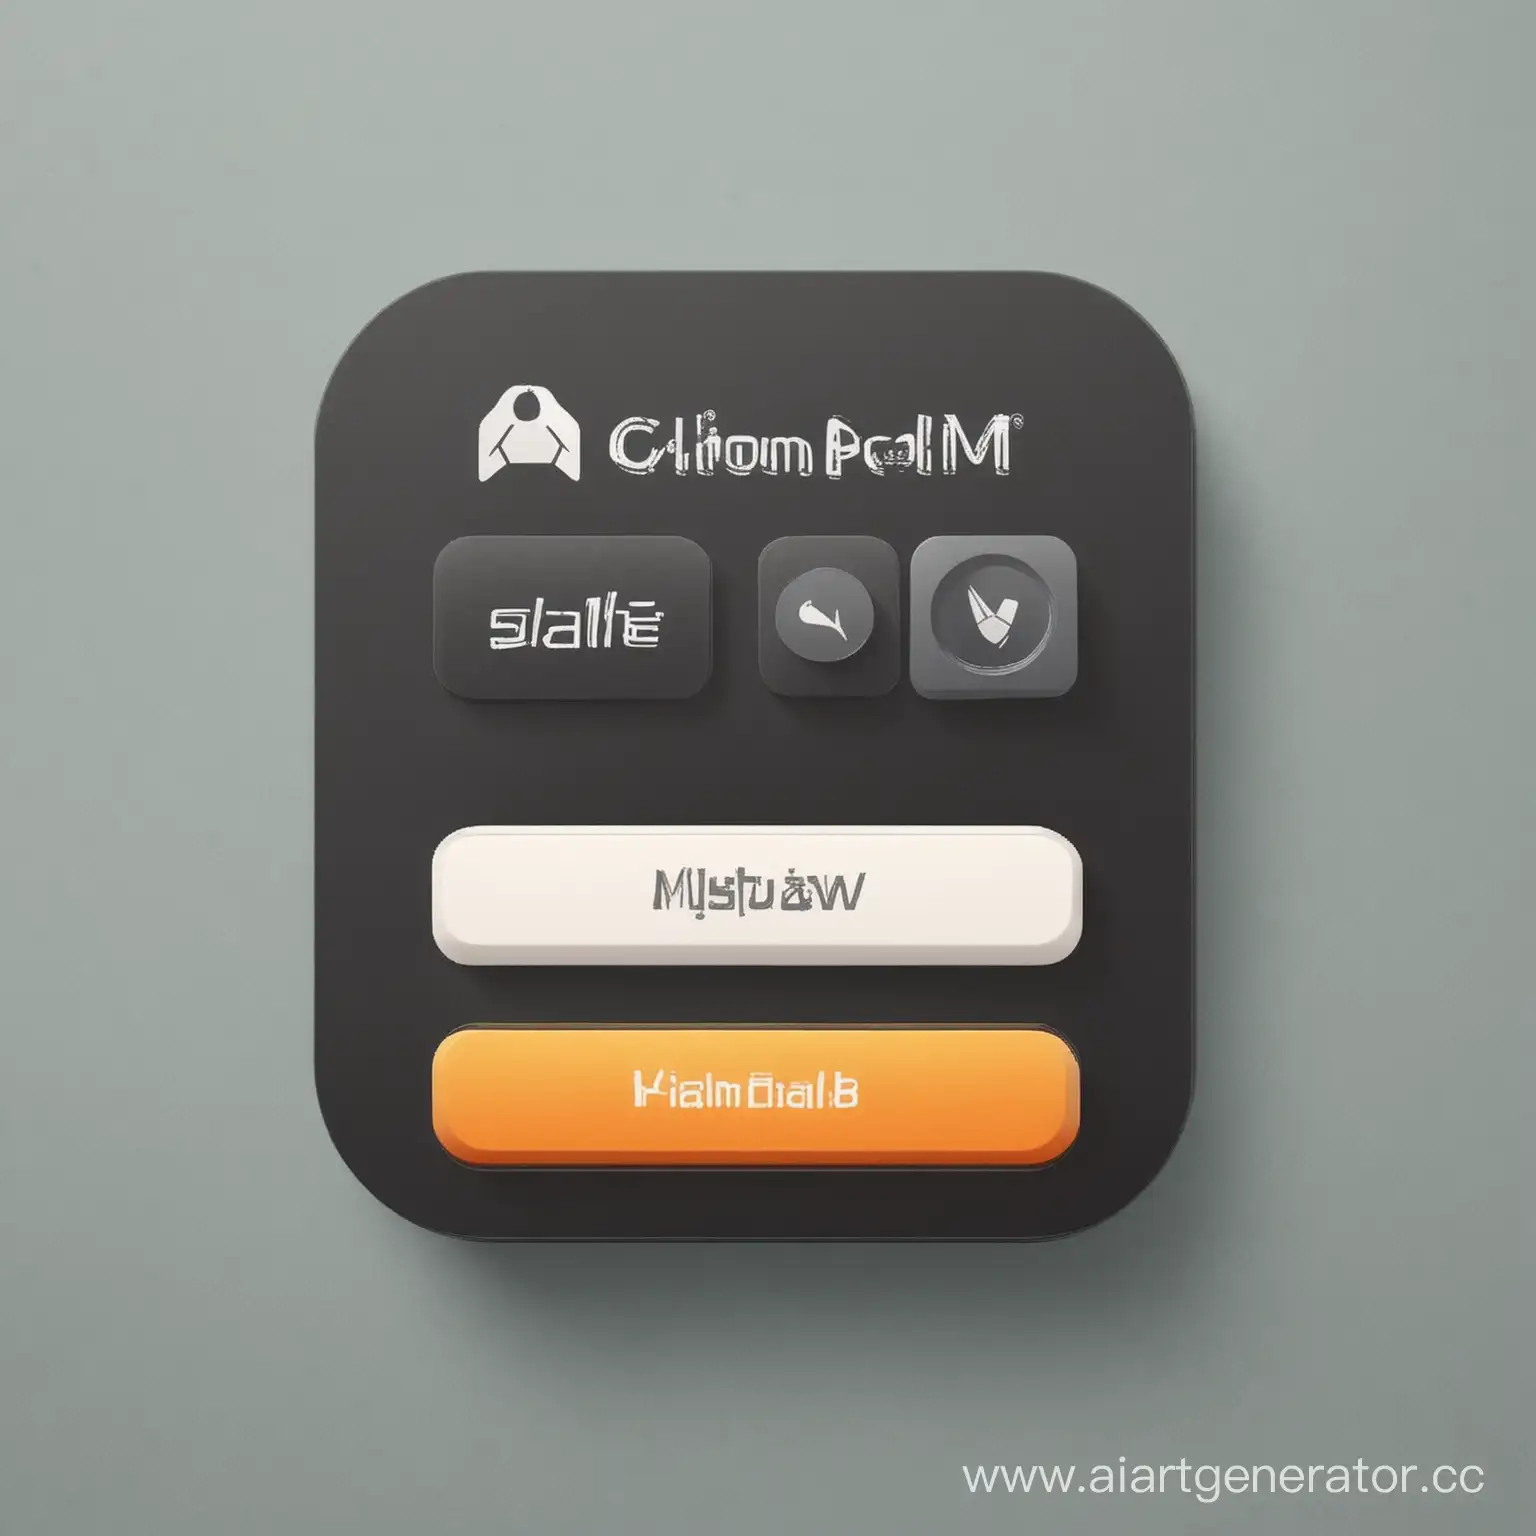 Main-Application-Screen-with-Logo-Title-and-Buttons